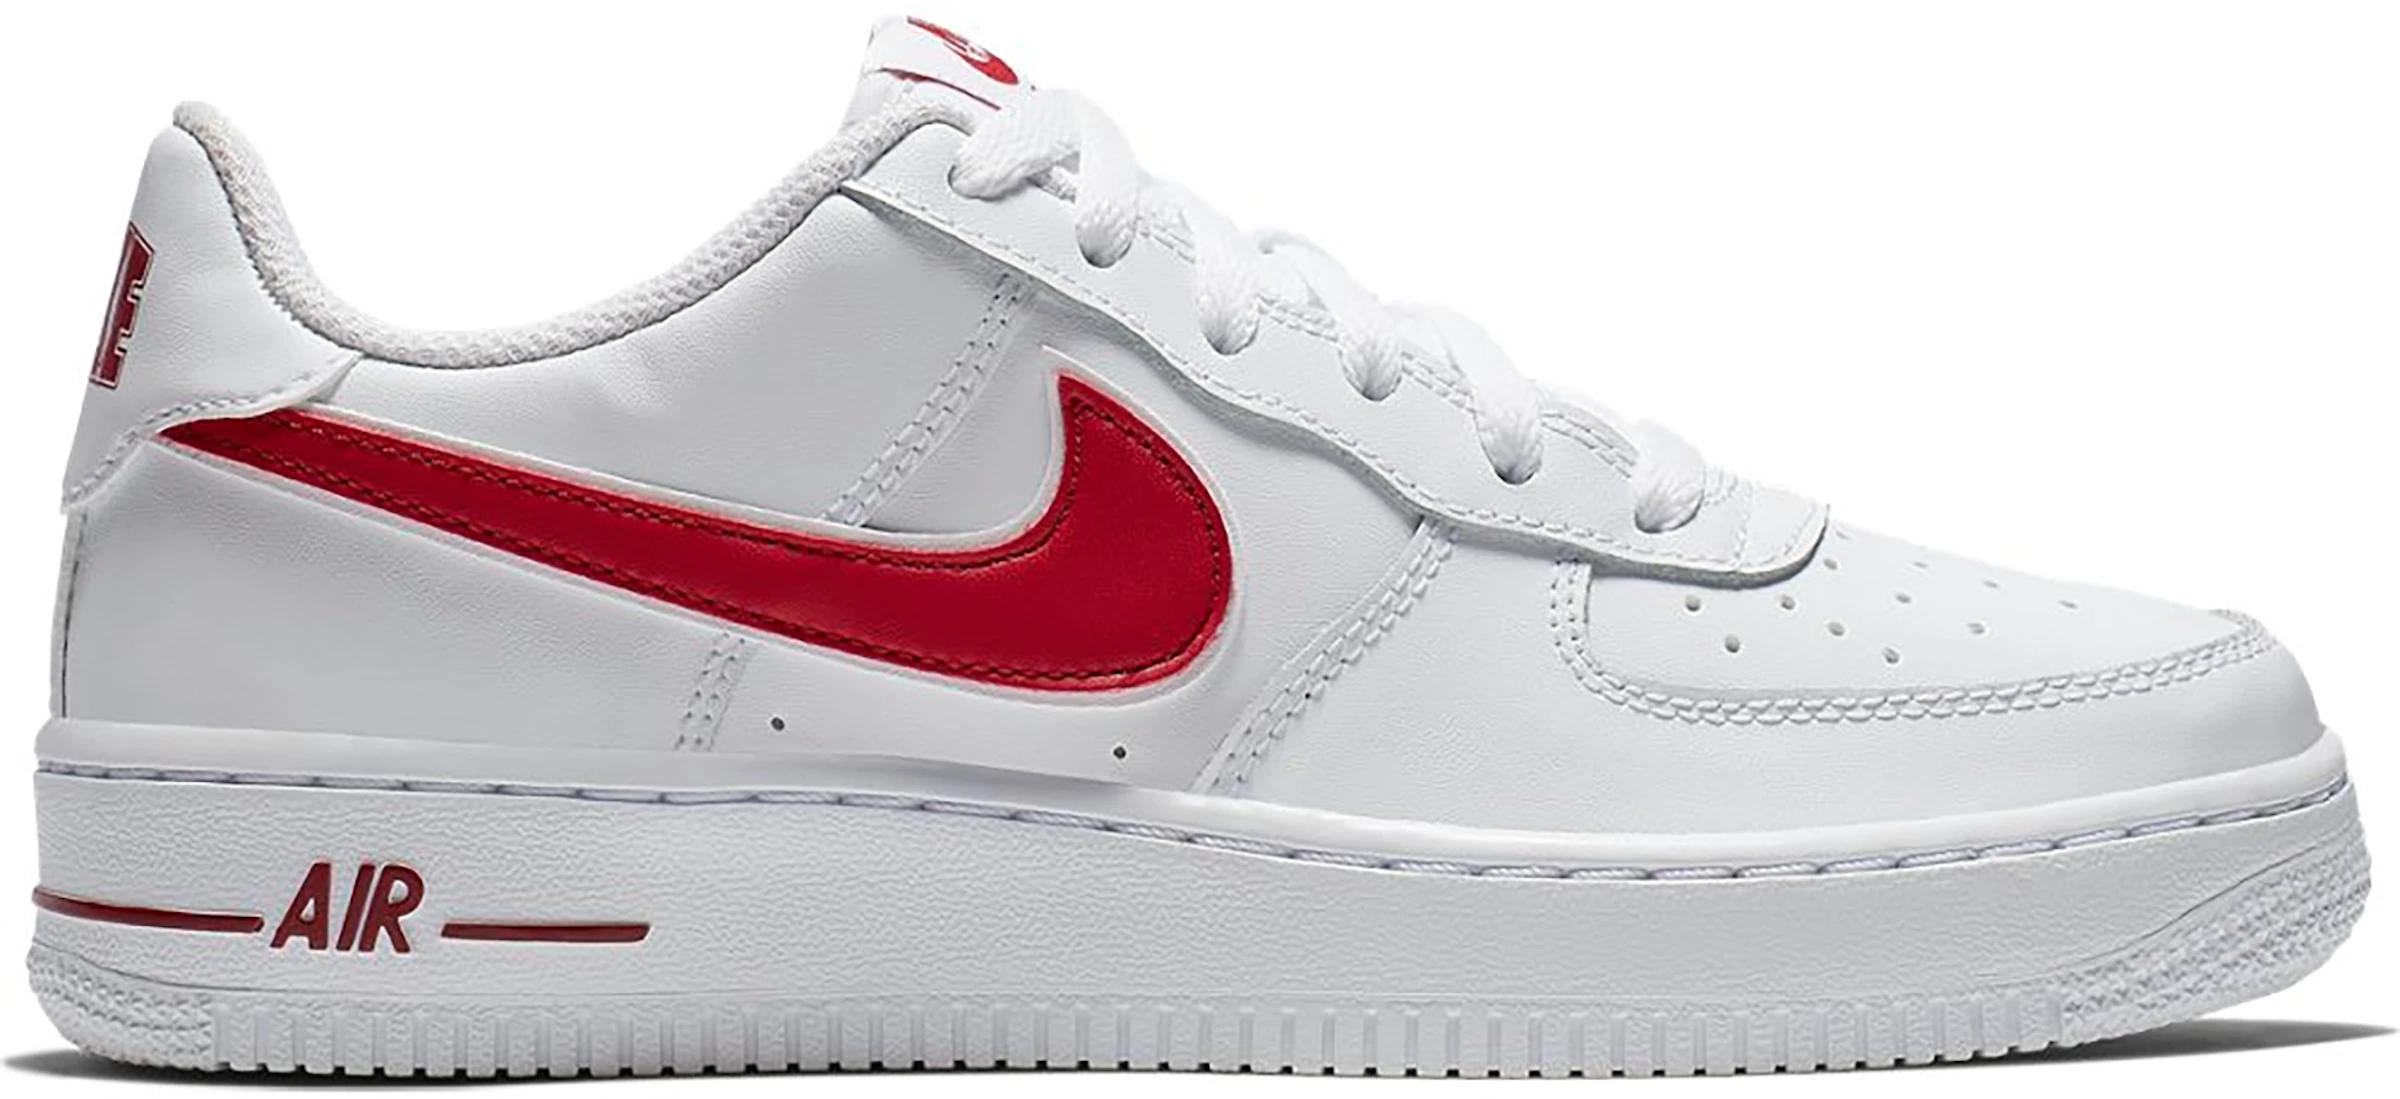 Nike Air Force 1 Low White Gym Red (GS) - AV6252-101 - US